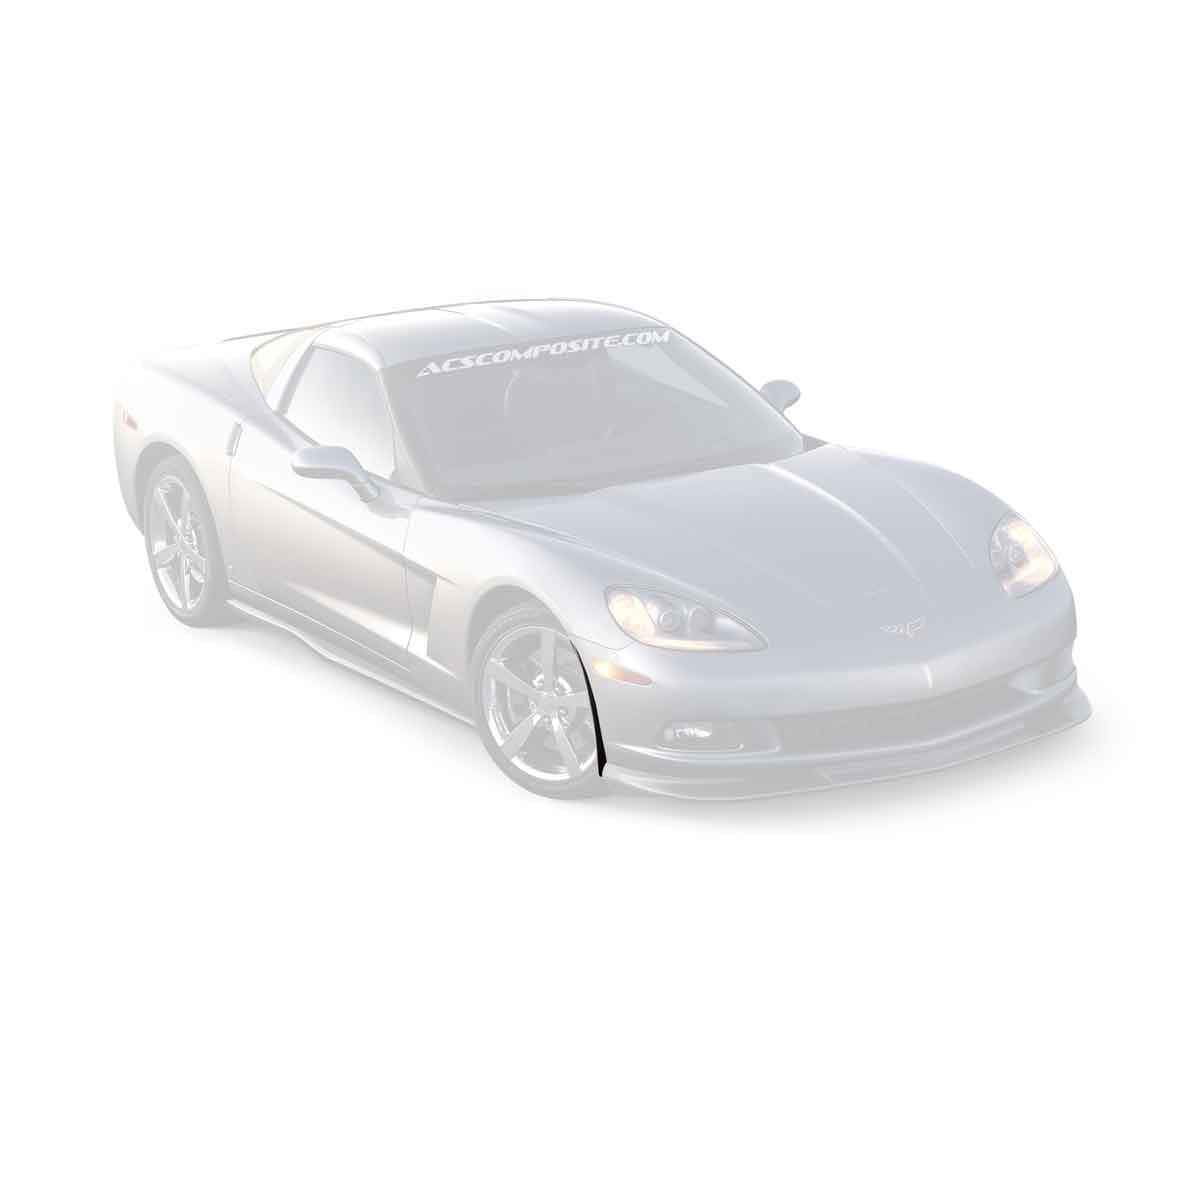 Zero6 Front Deflectors for C6 Corvette [27-4-039]CFZ by ACS Composite - Enhance brake cooling and reduce brake dust while optimizing frontal airflow. High-quality RTM Composite construction. Available in Carbon Flash Black finish.